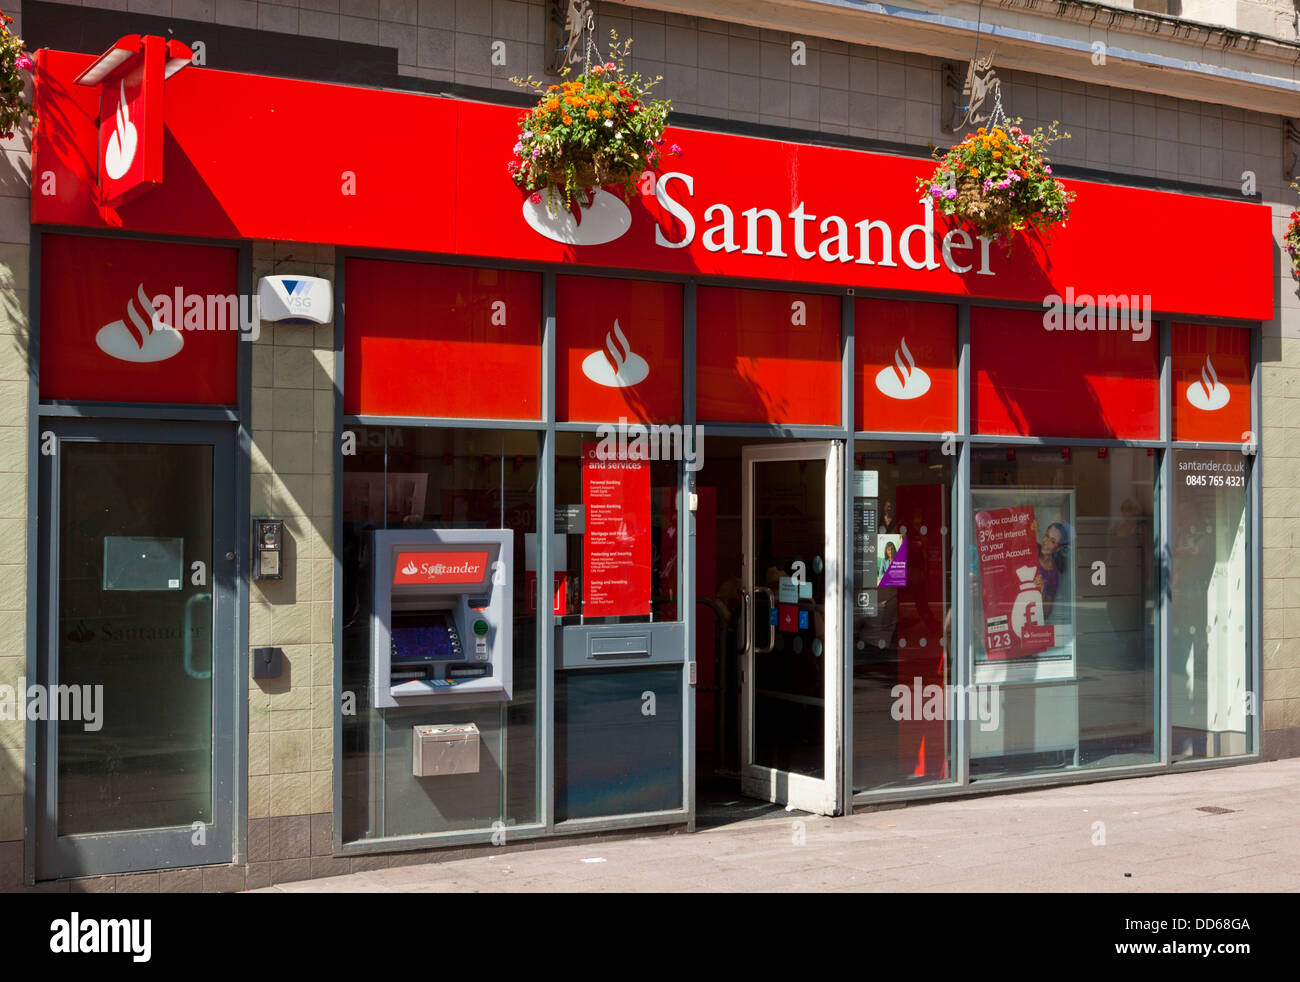 Exterior of the Santander bank branch on Queen street Cardiff South Glmorgan South Wales UK GB EU Europe Stock Photo